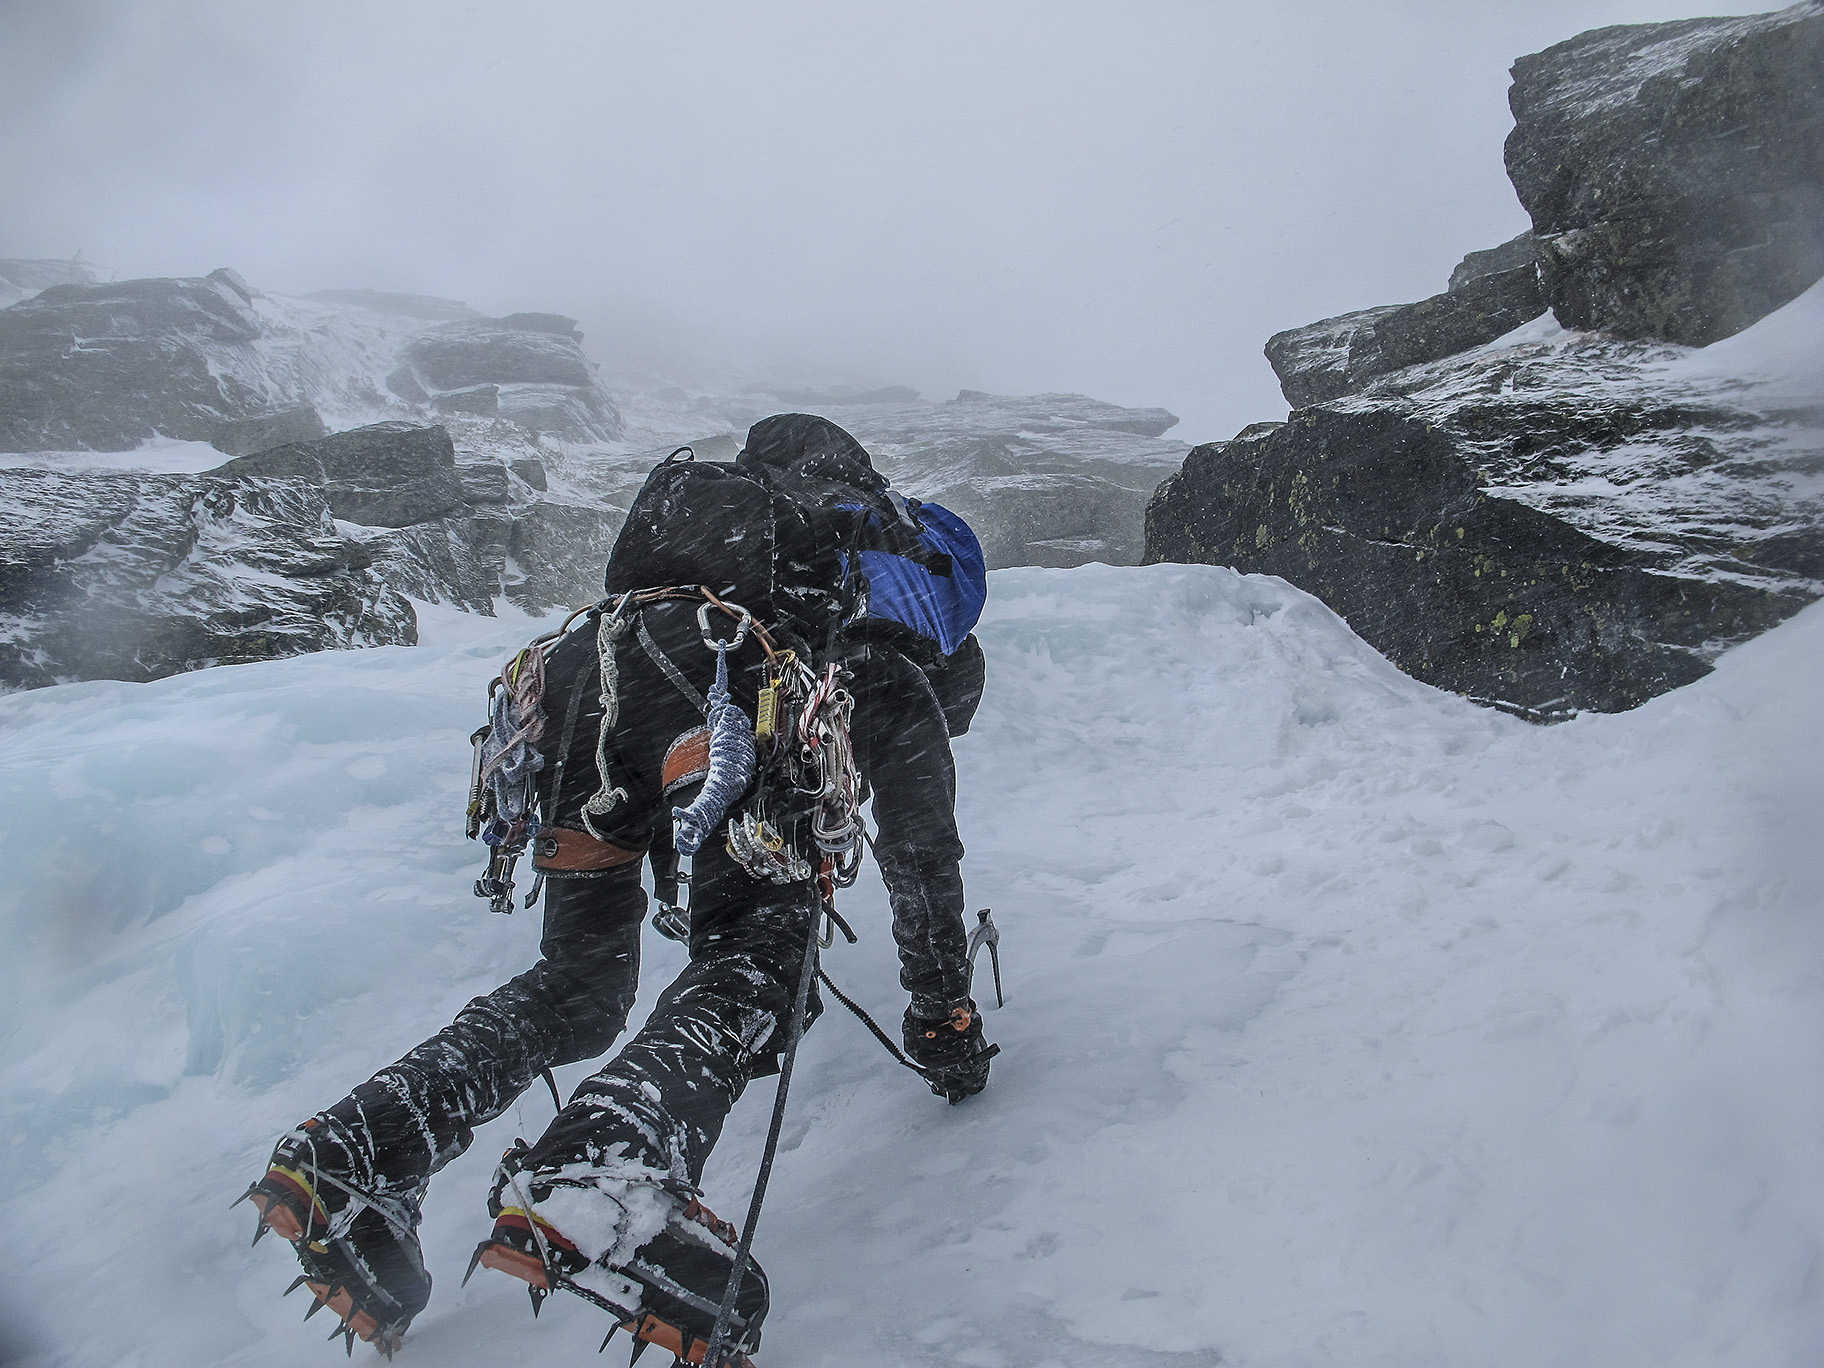 a mountaineer clings to ice with crampons and an ice ax, photo by Chris Vultaggio